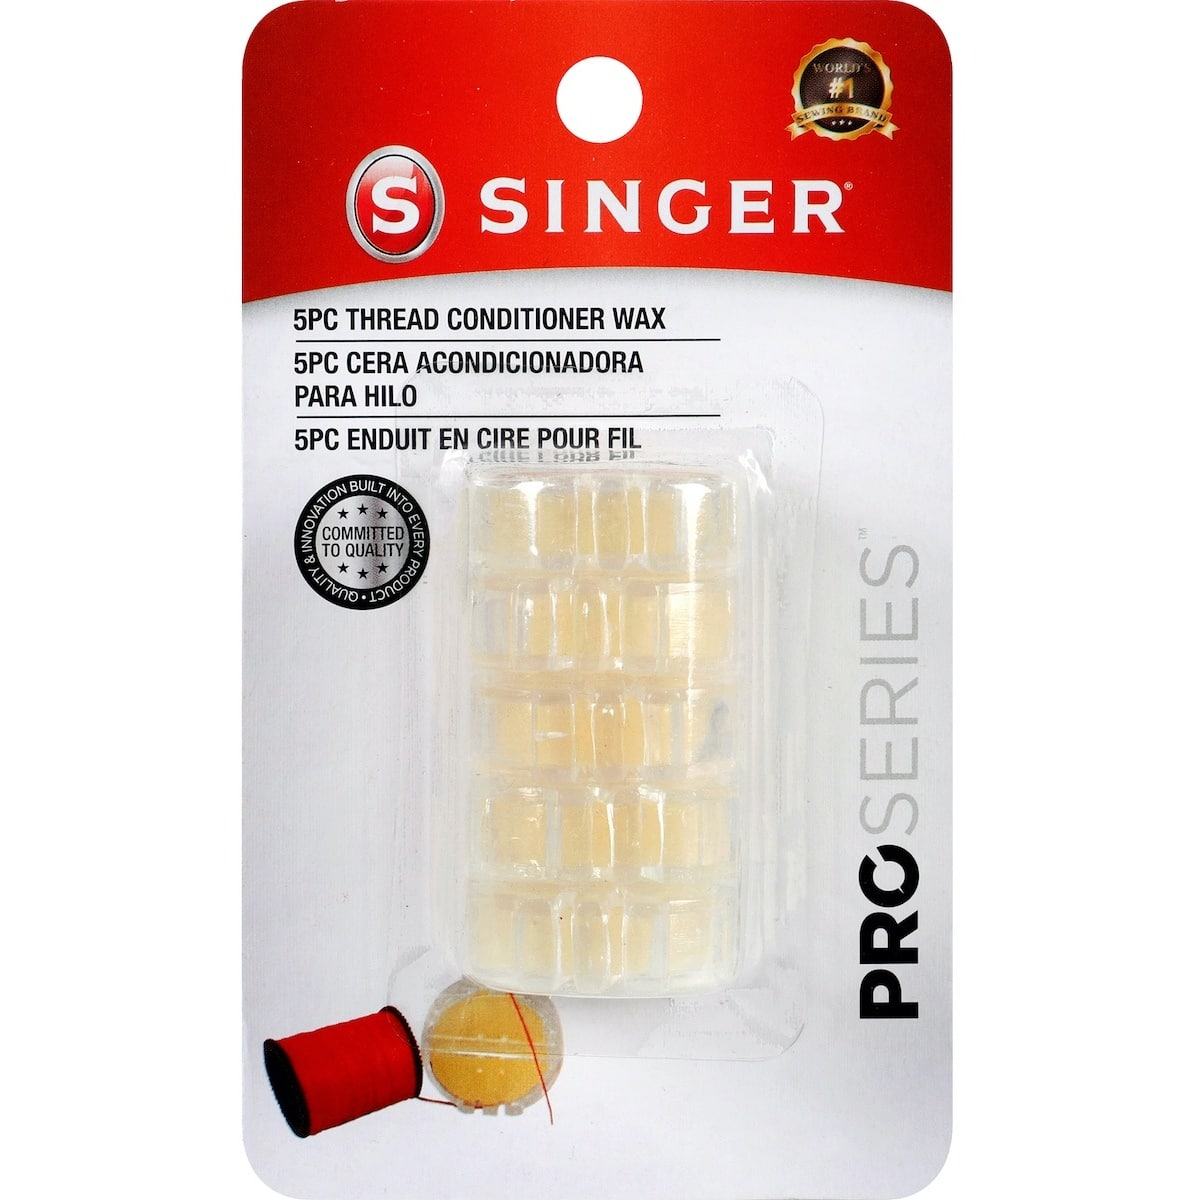 SINGER® ProSeries Thread Conditioner Wax, 5ct., Pack of 3